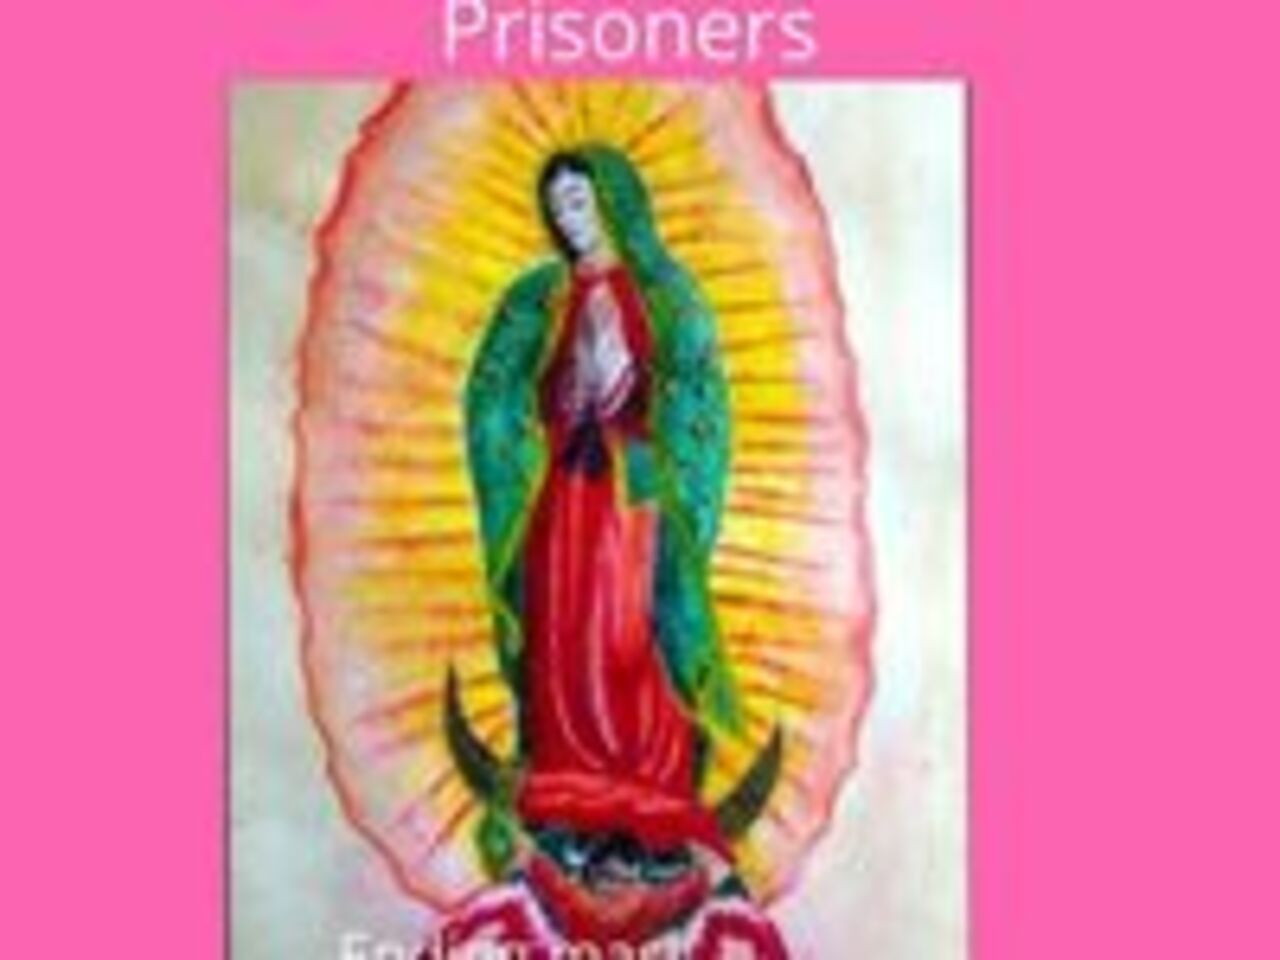 21 Best Mother Day Cards by Prisoners ideas in 2022 | mothers day cards, prison art, colorful backgrounds